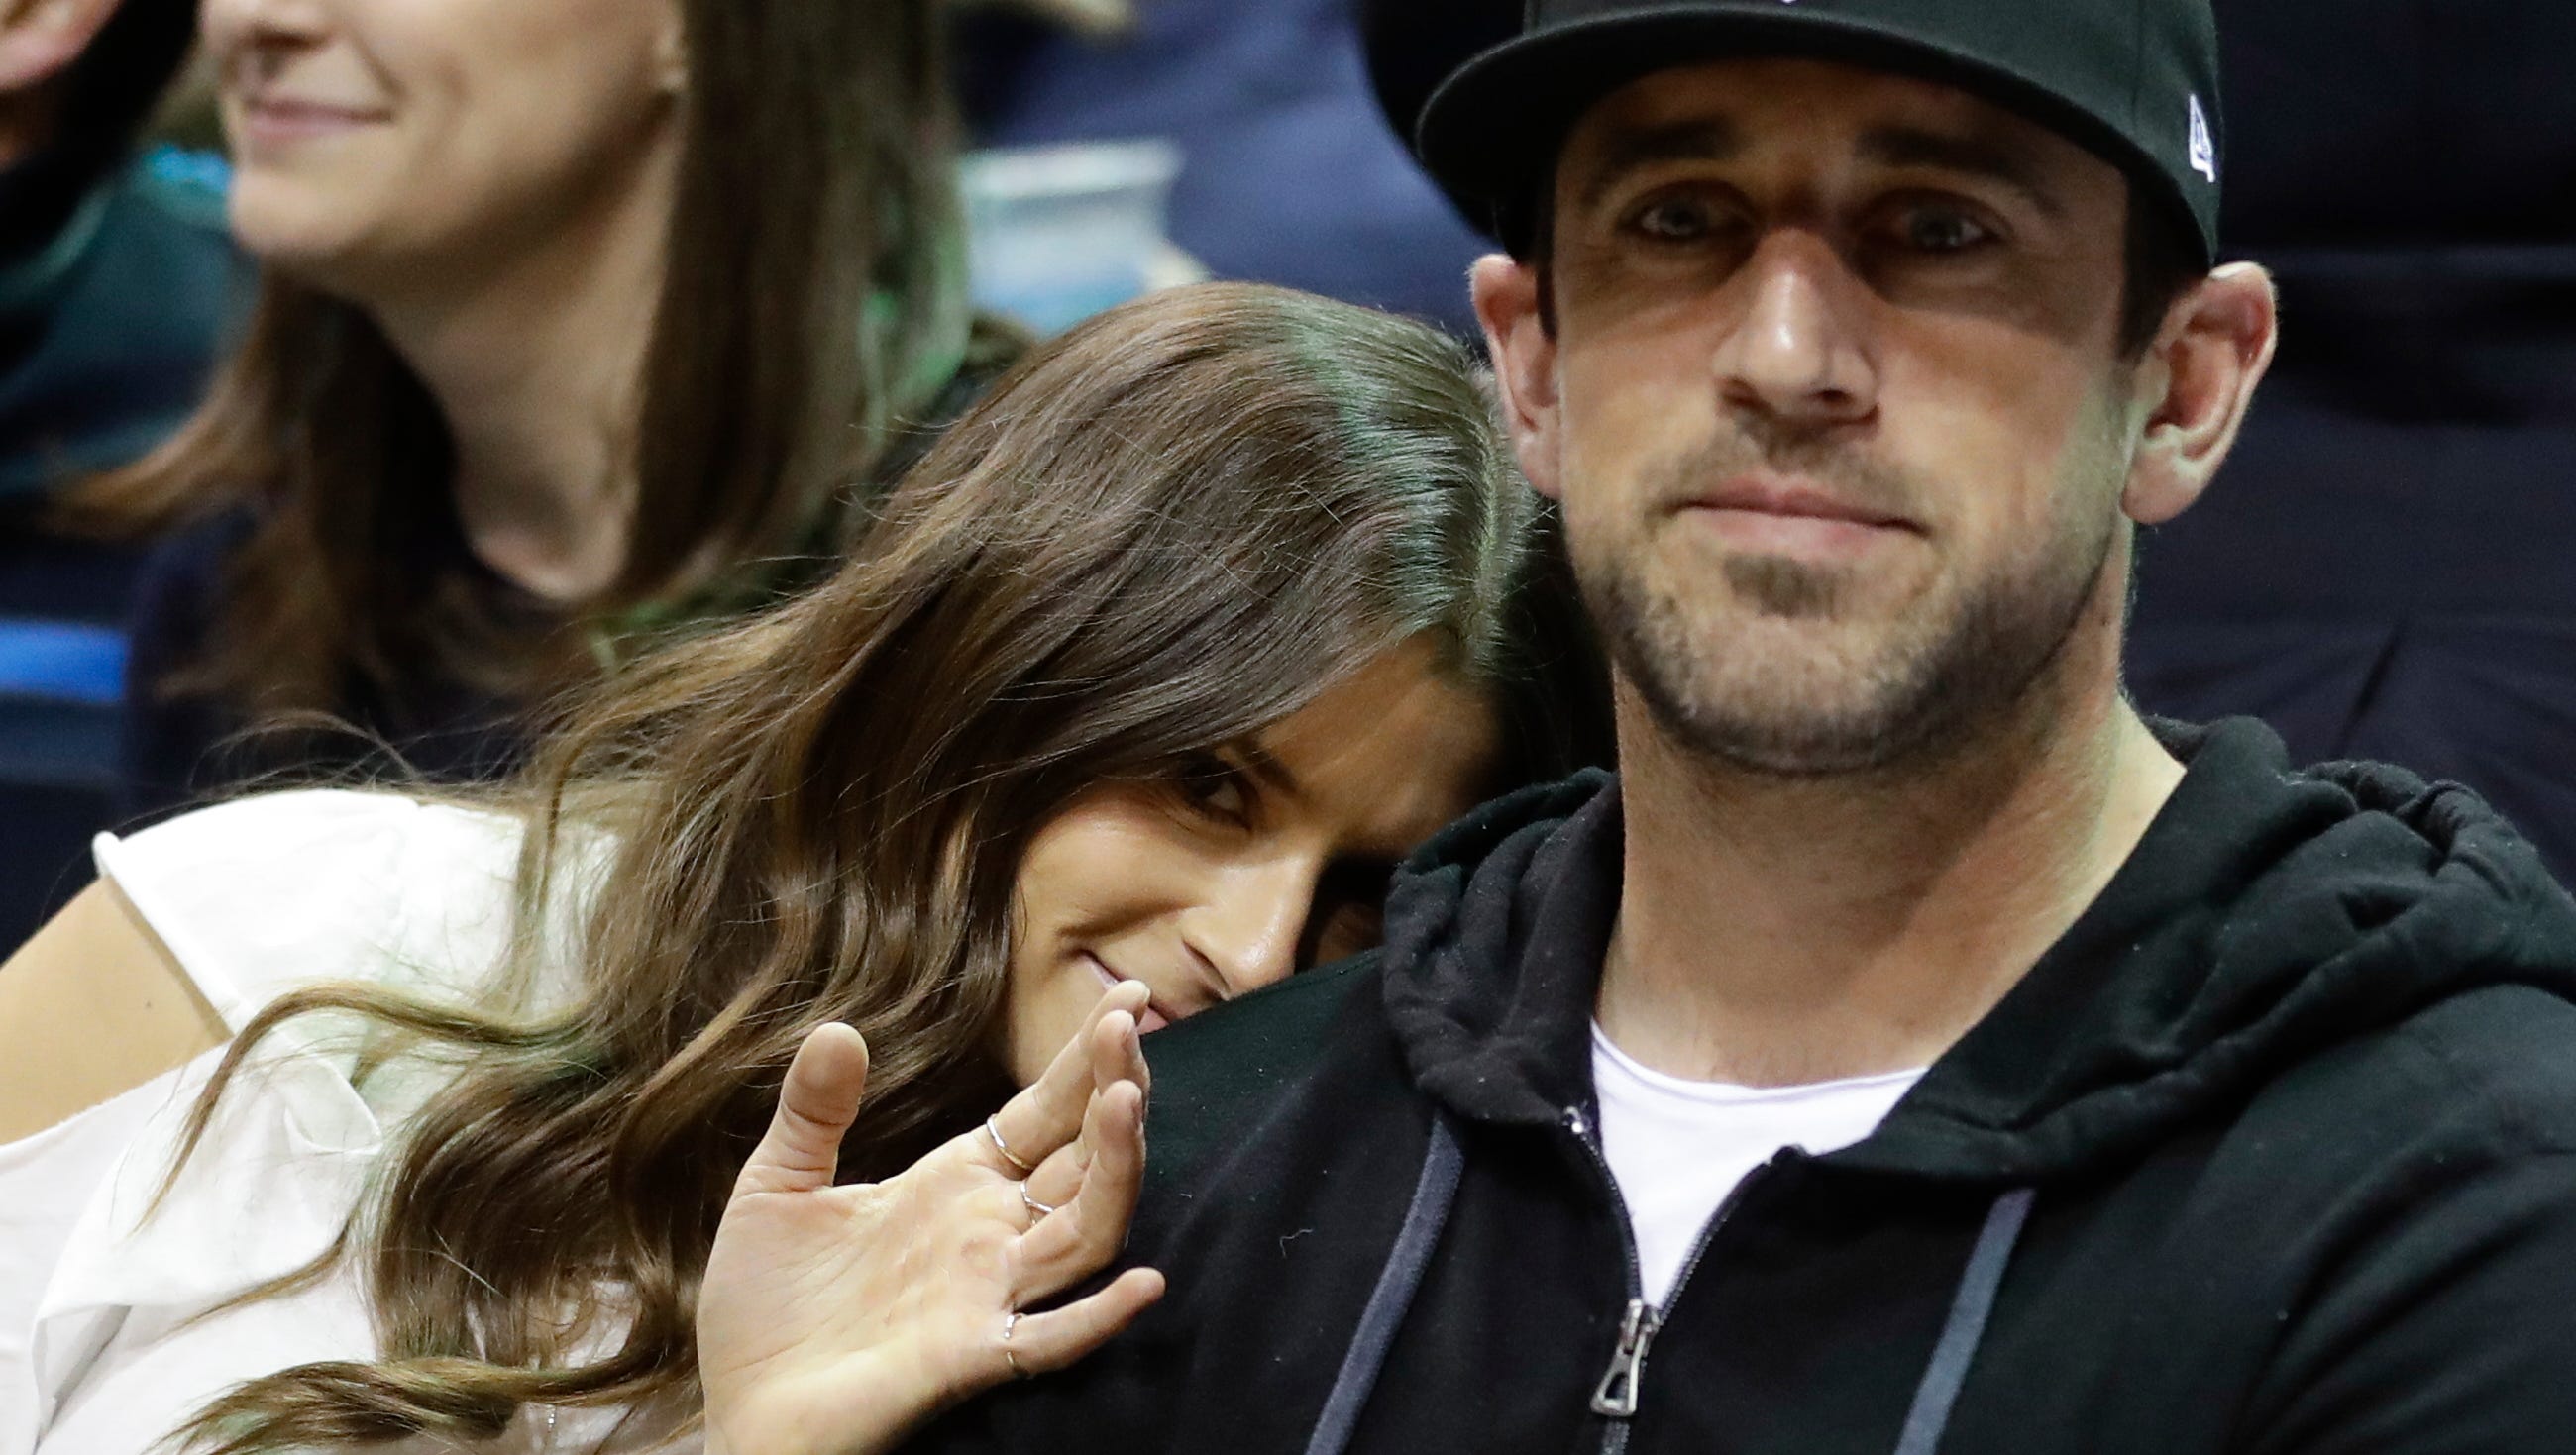 Danica Patrick and Aaron Rodgers watch Game 3 between the Bucks and Celtics on Friday night.